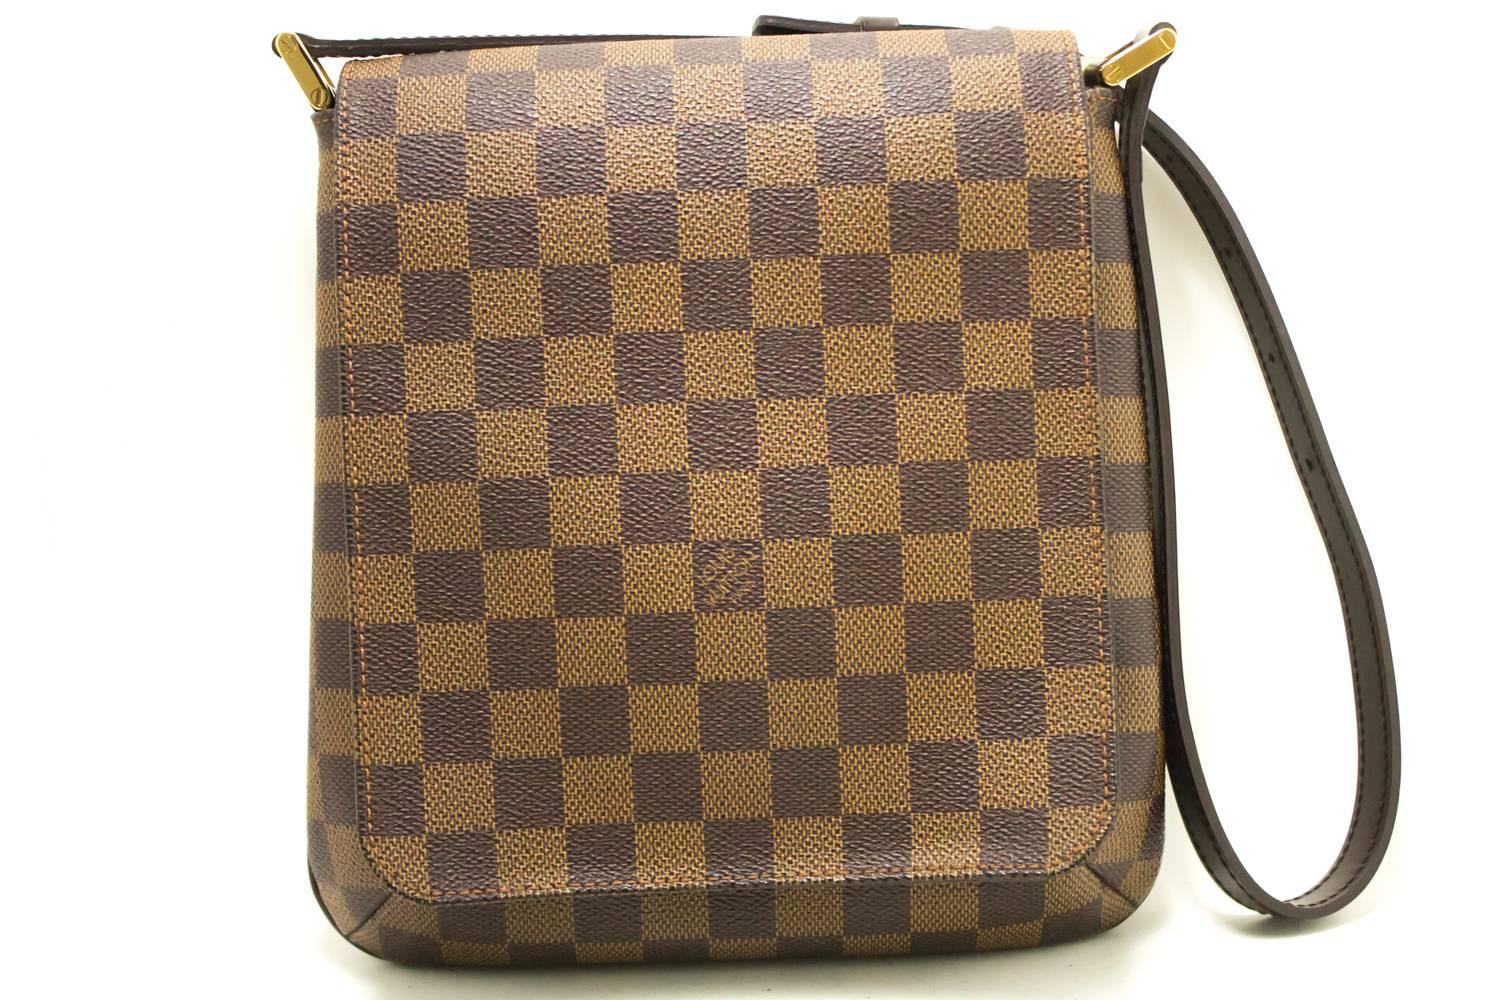 An authentic Louis Vuitton Damier Ebene Musette Salsa Short Strap Shoulder Bag The outside material is Canvas / Leather.
Conditions & Ratings
Outside material: Canvas / Leather
Main color: Brown
Closure: Snap
Hardware: Gold-tone
Made in Spain
Comes